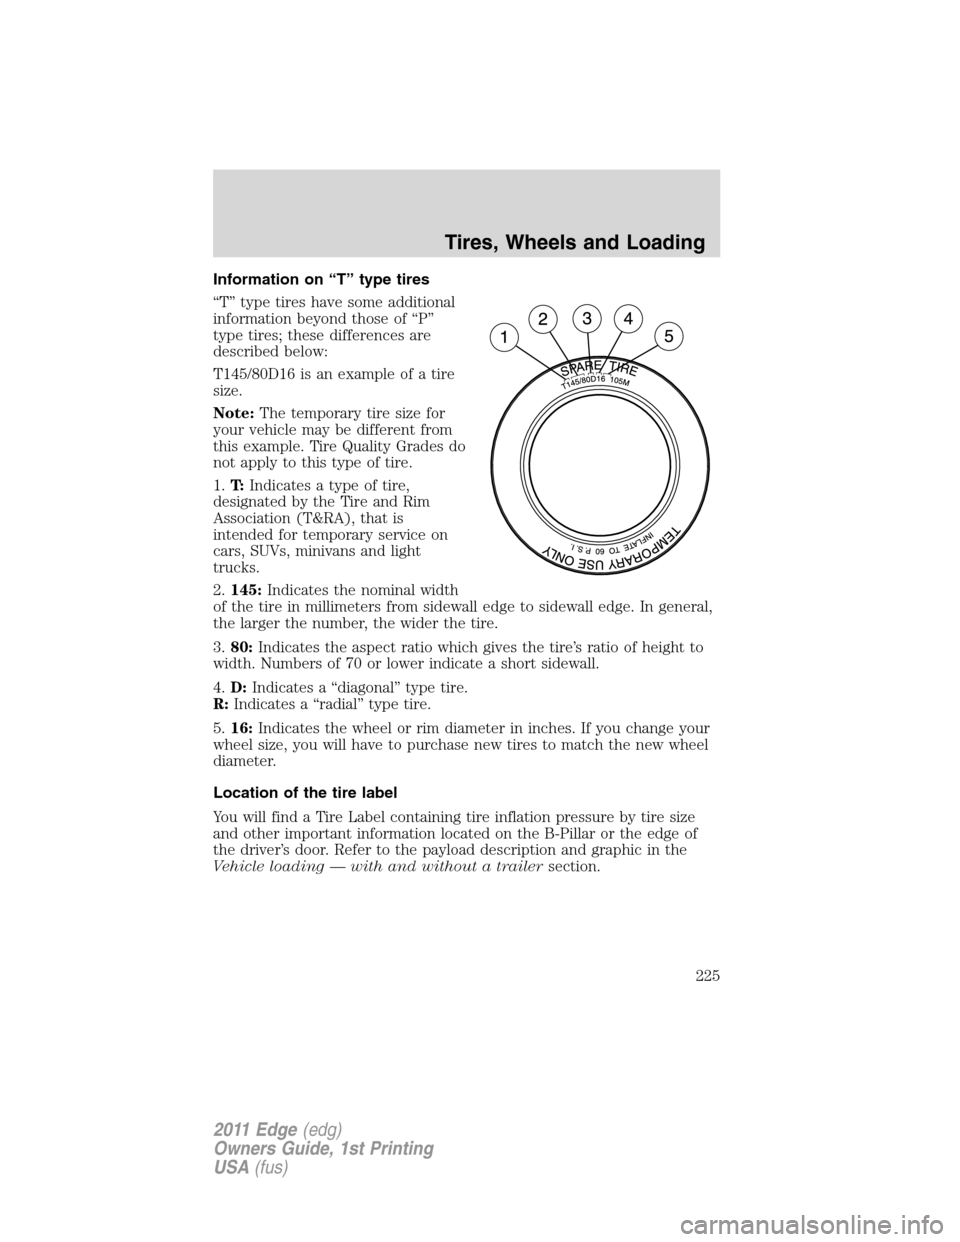 FORD EDGE 2011 1.G User Guide Information on “T” type tires
“T” type tires have some additional
information beyond those of “P”
type tires; these differences are
described below:
T145/80D16 is an example of a tire
size